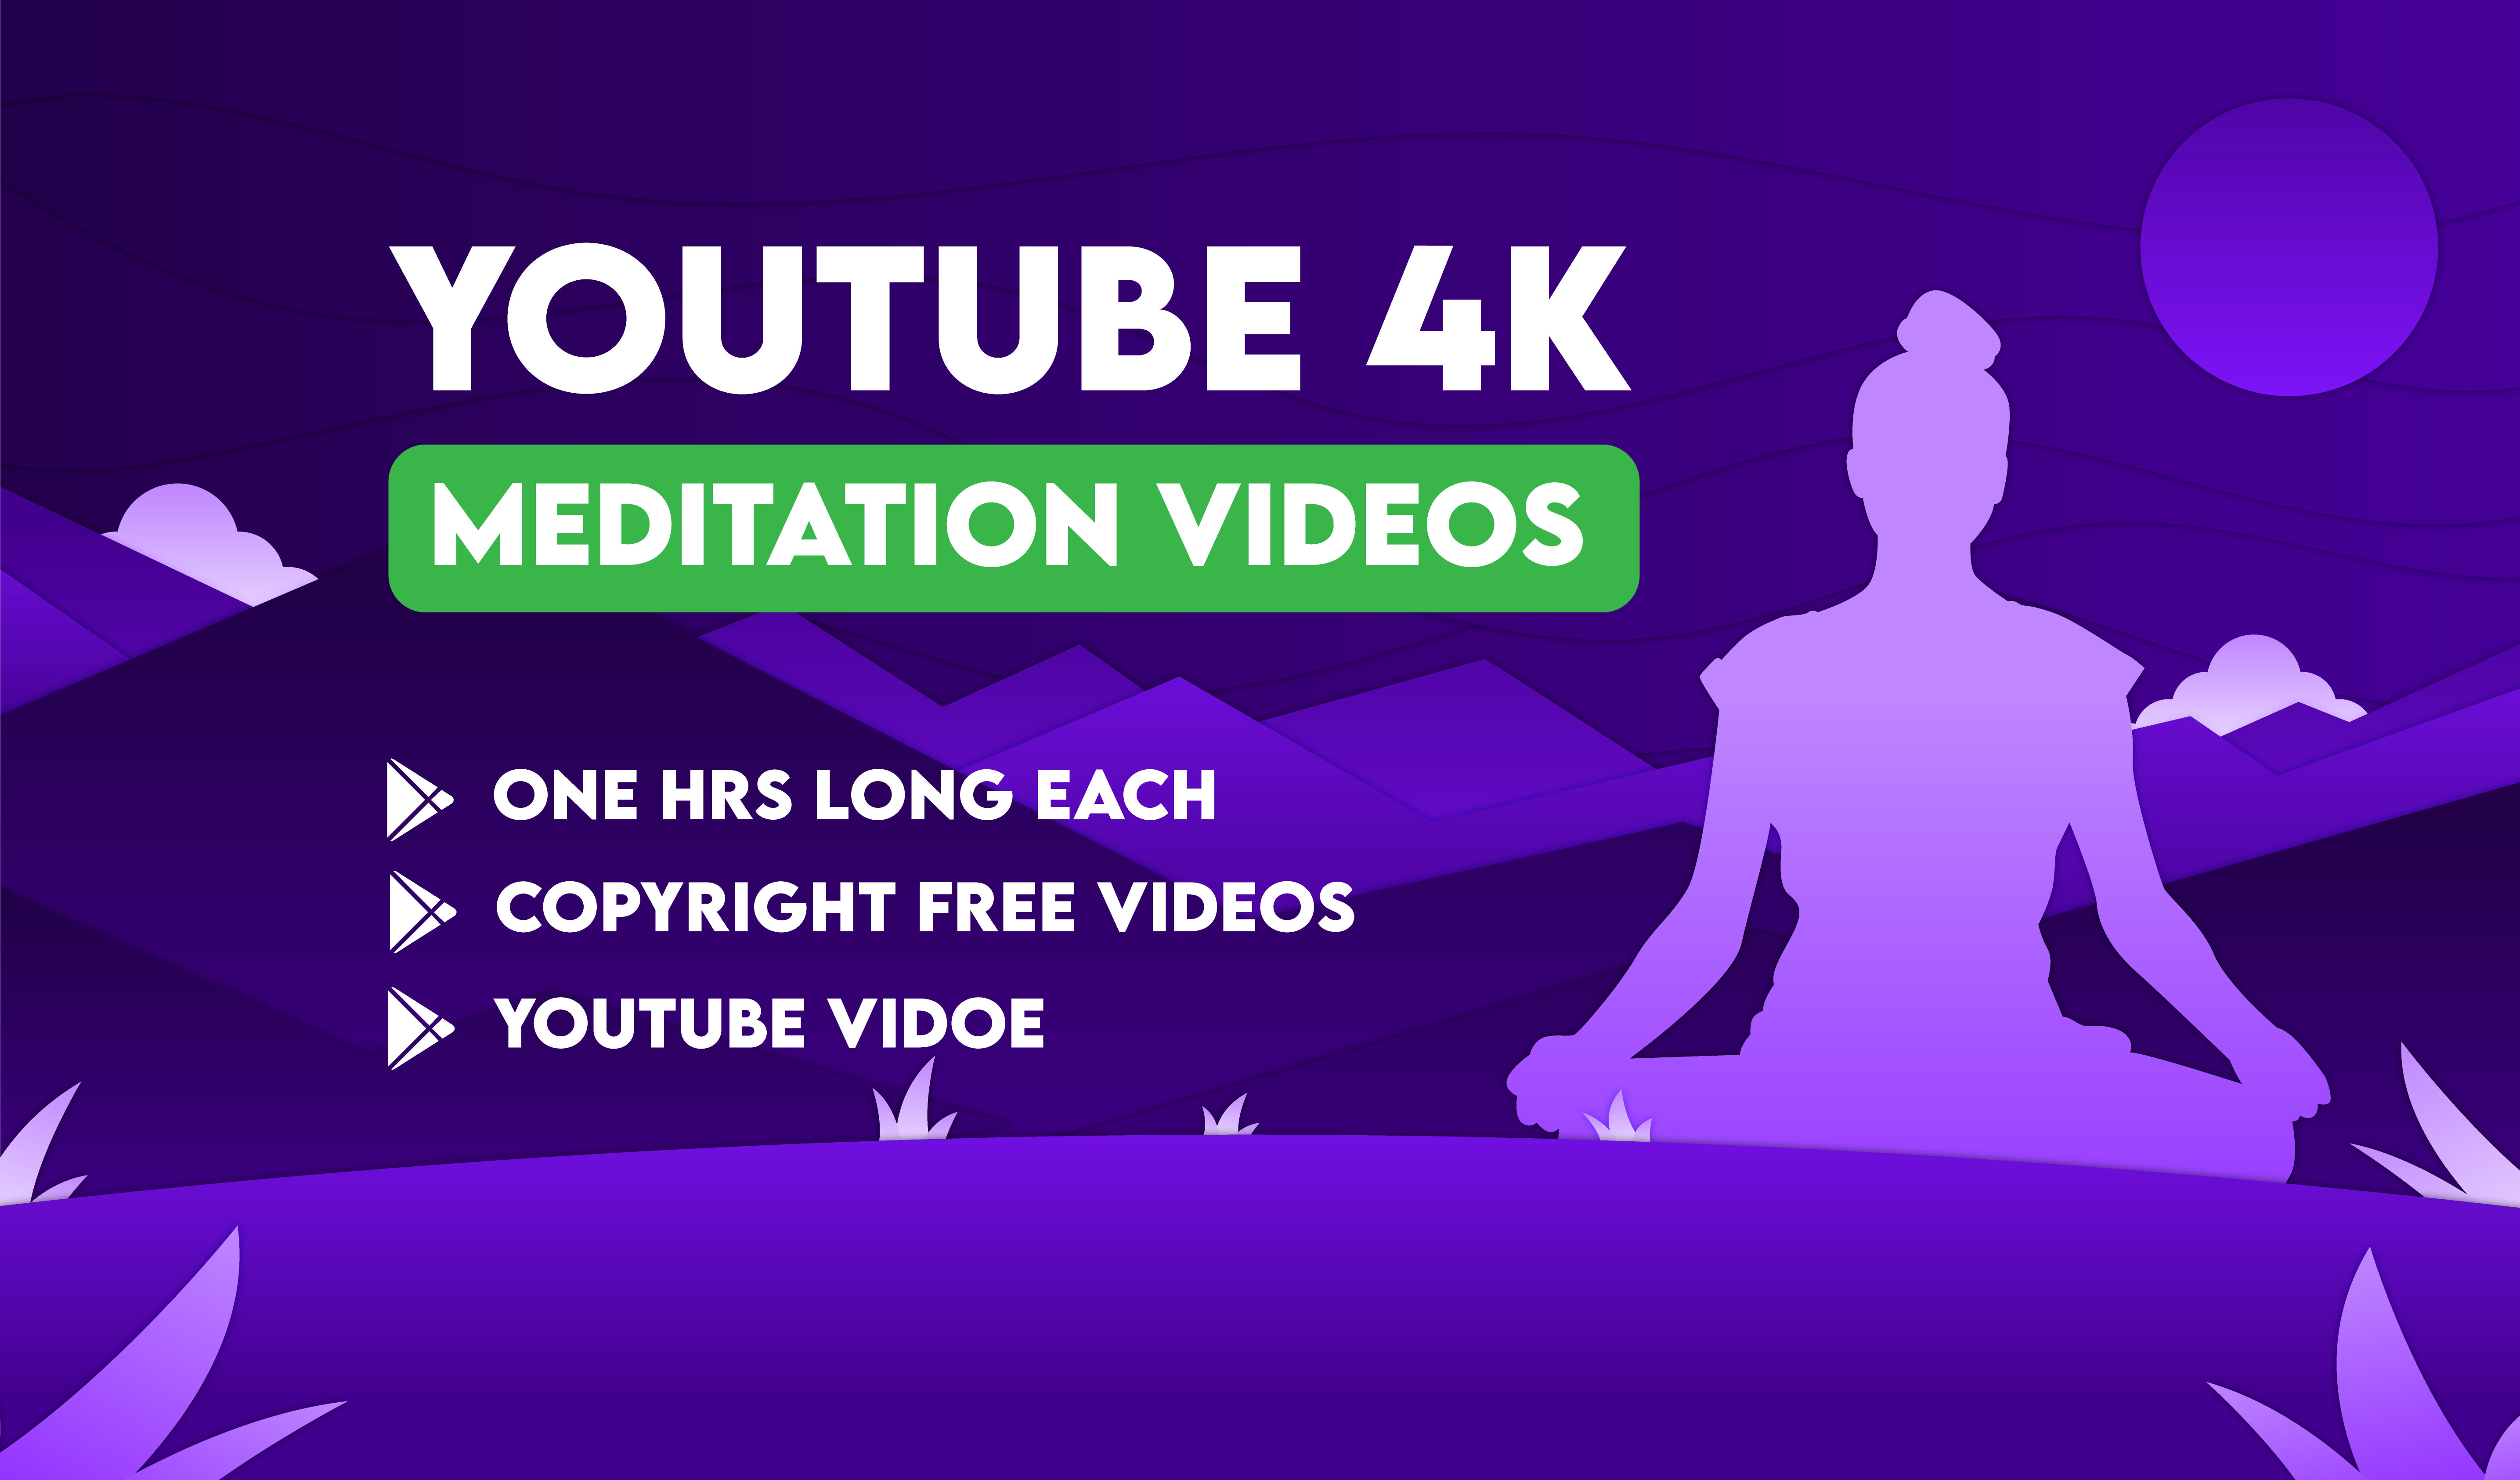 Create 15 relaxing meditation videos for youtube in 4k by | Fiverr